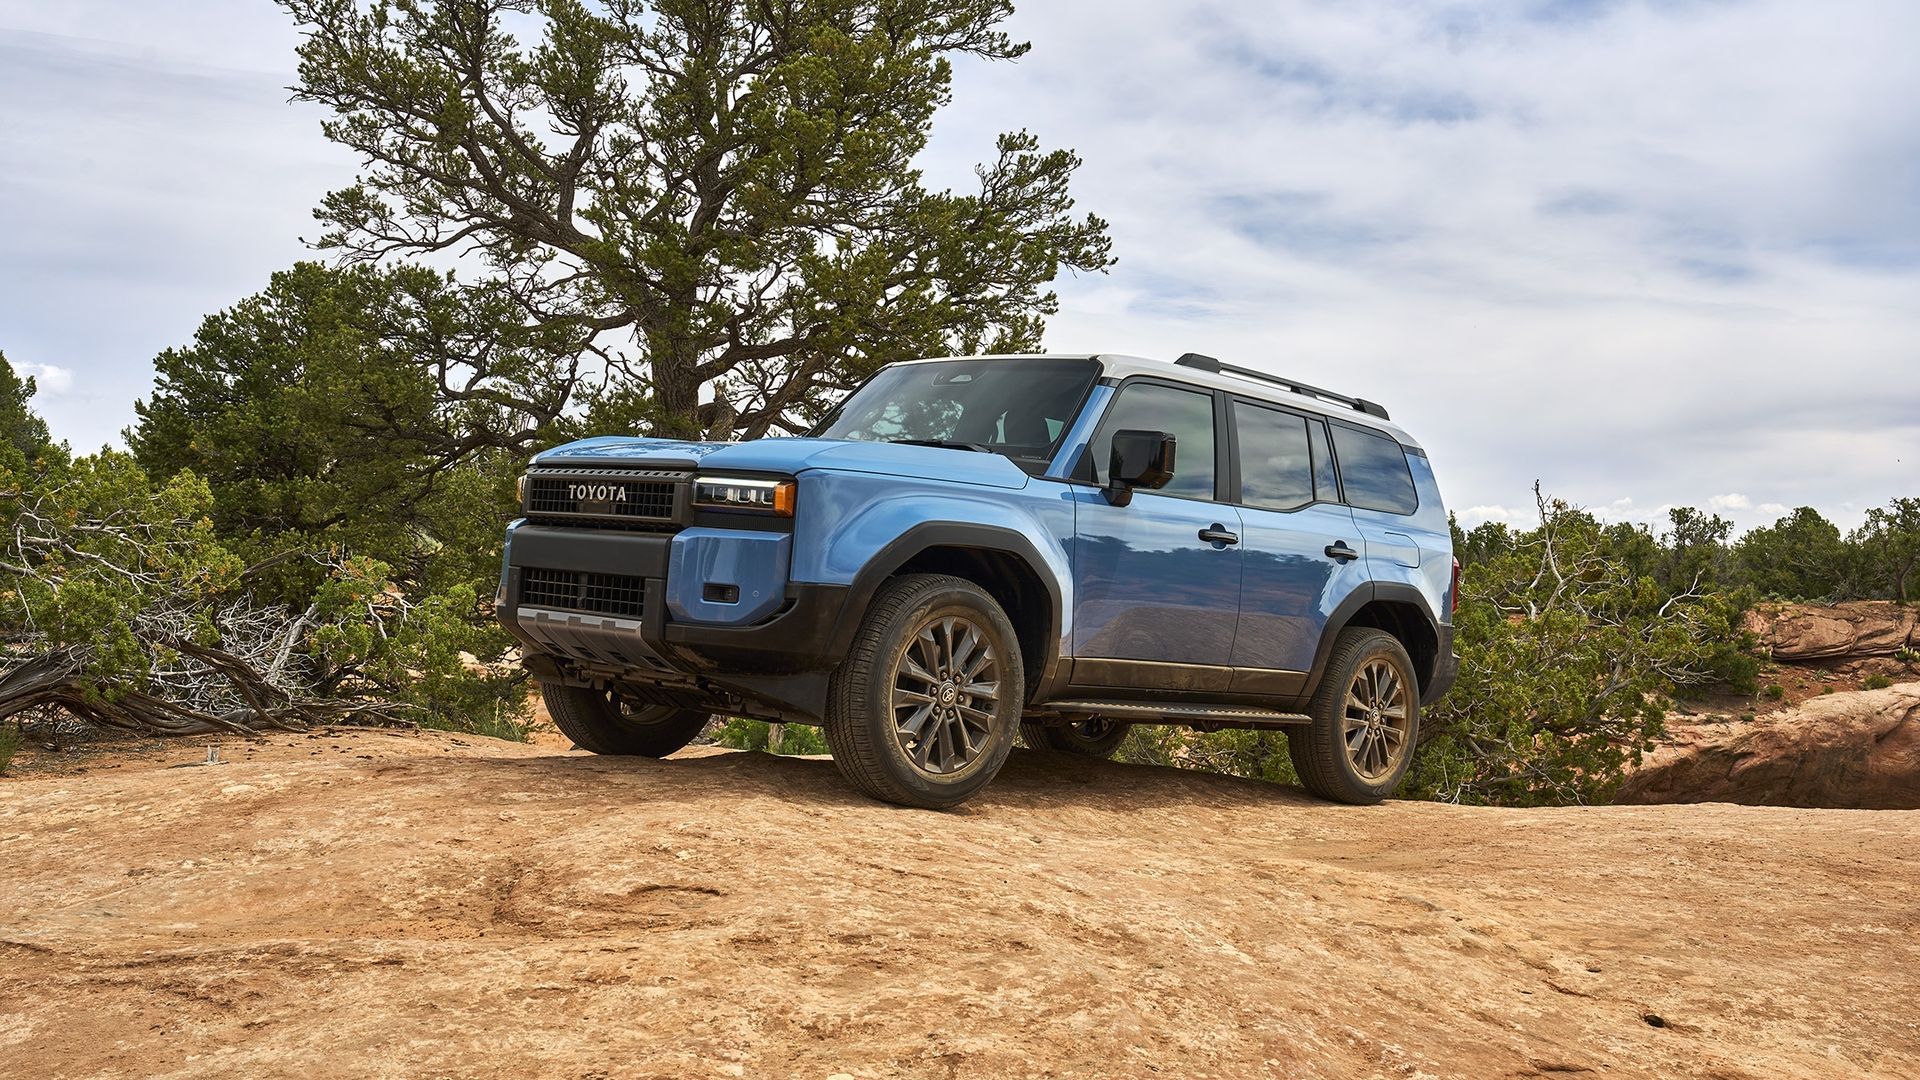 How The Toyota Land Cruiser Stacks Up Against The Ford Bronco: Off-Road ...